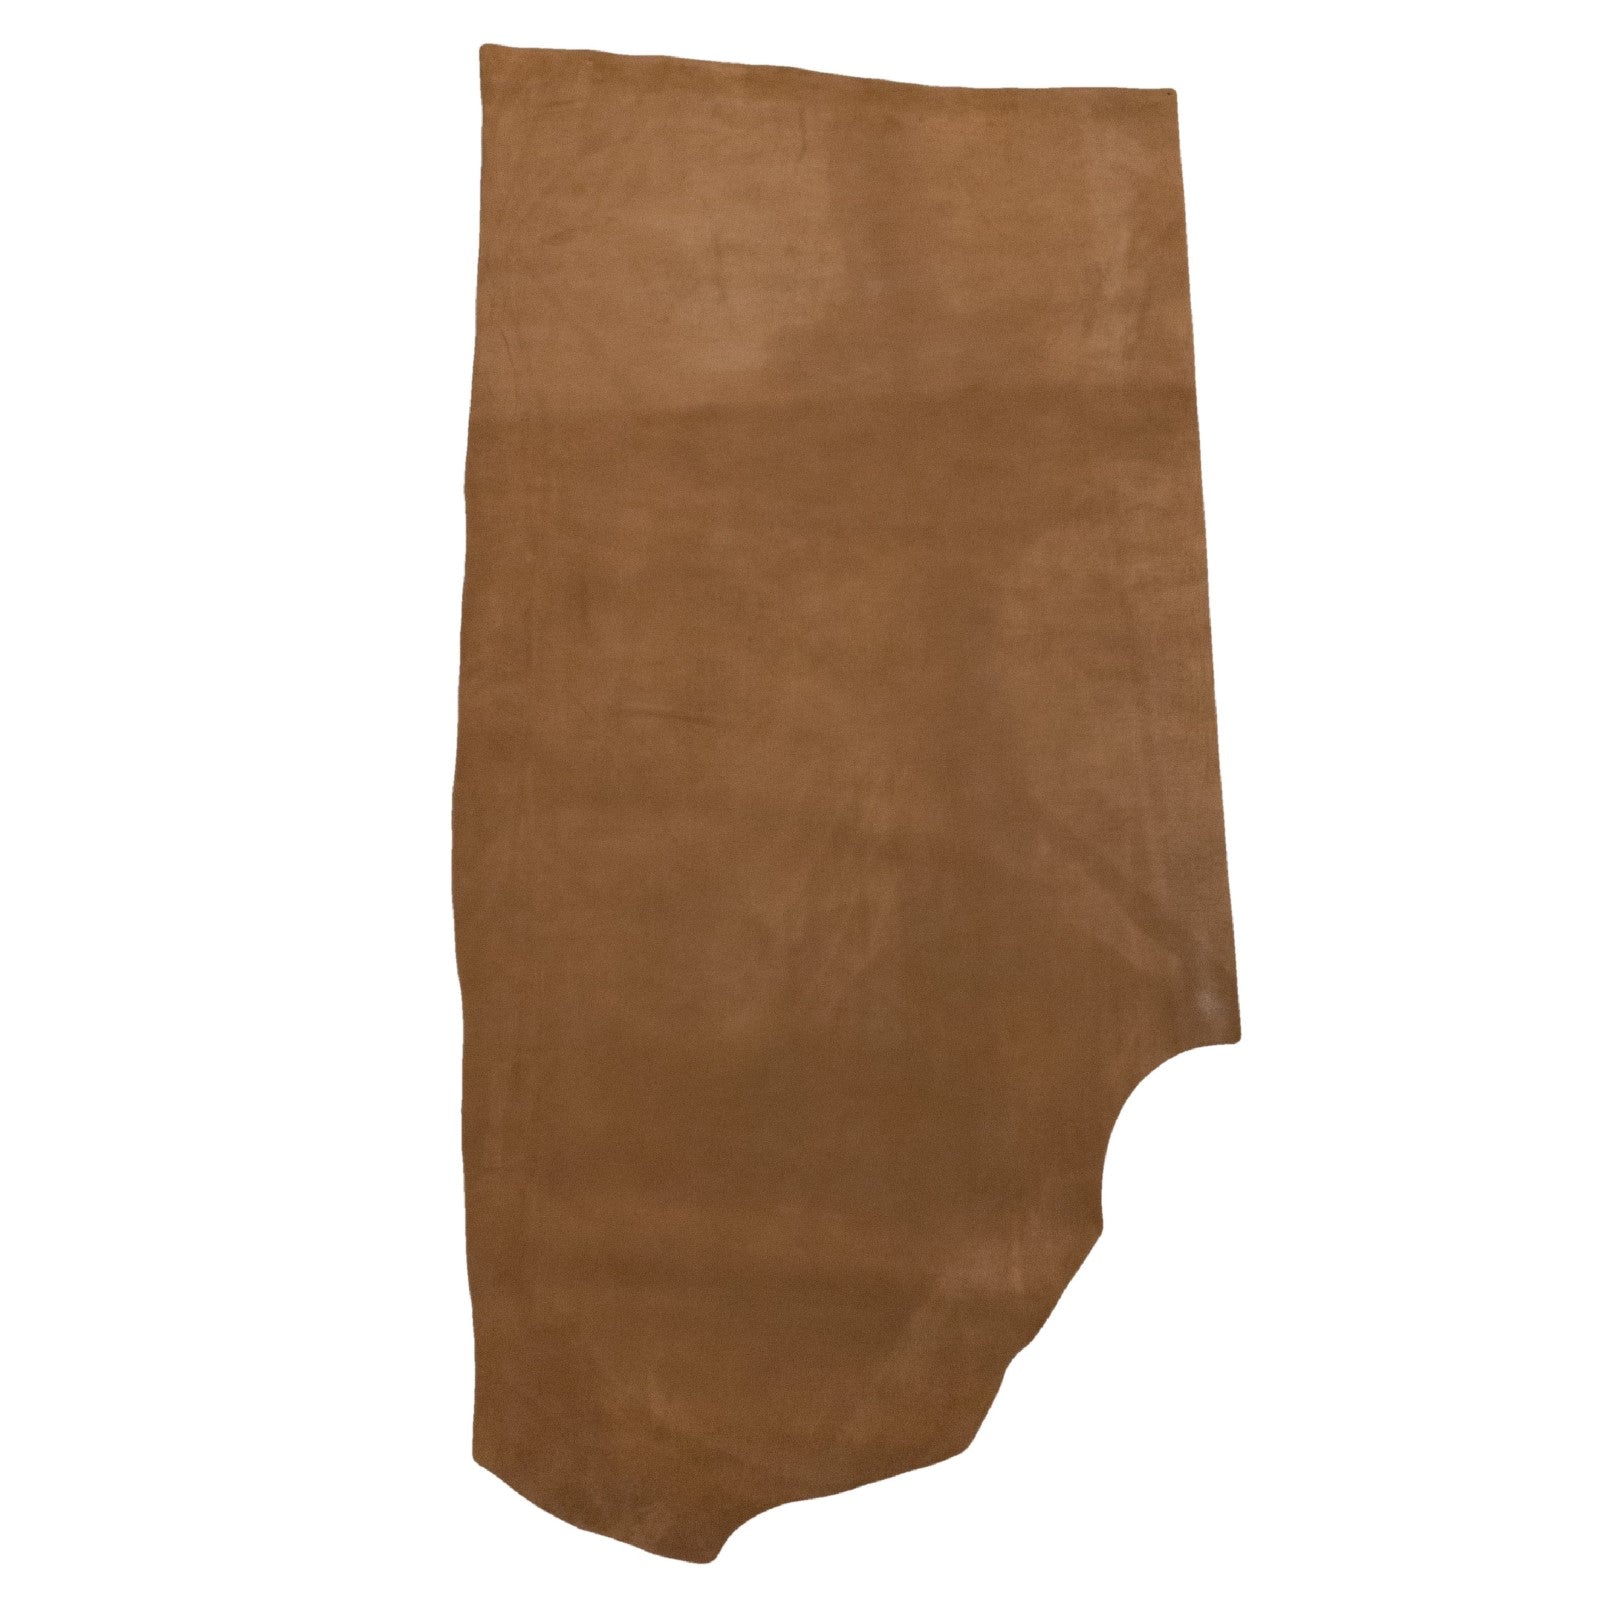 Warm Gingersnap, Split Suede, 3-4 oz, 9-10 sq ft, Cow Pieces,  | The Leather Guy